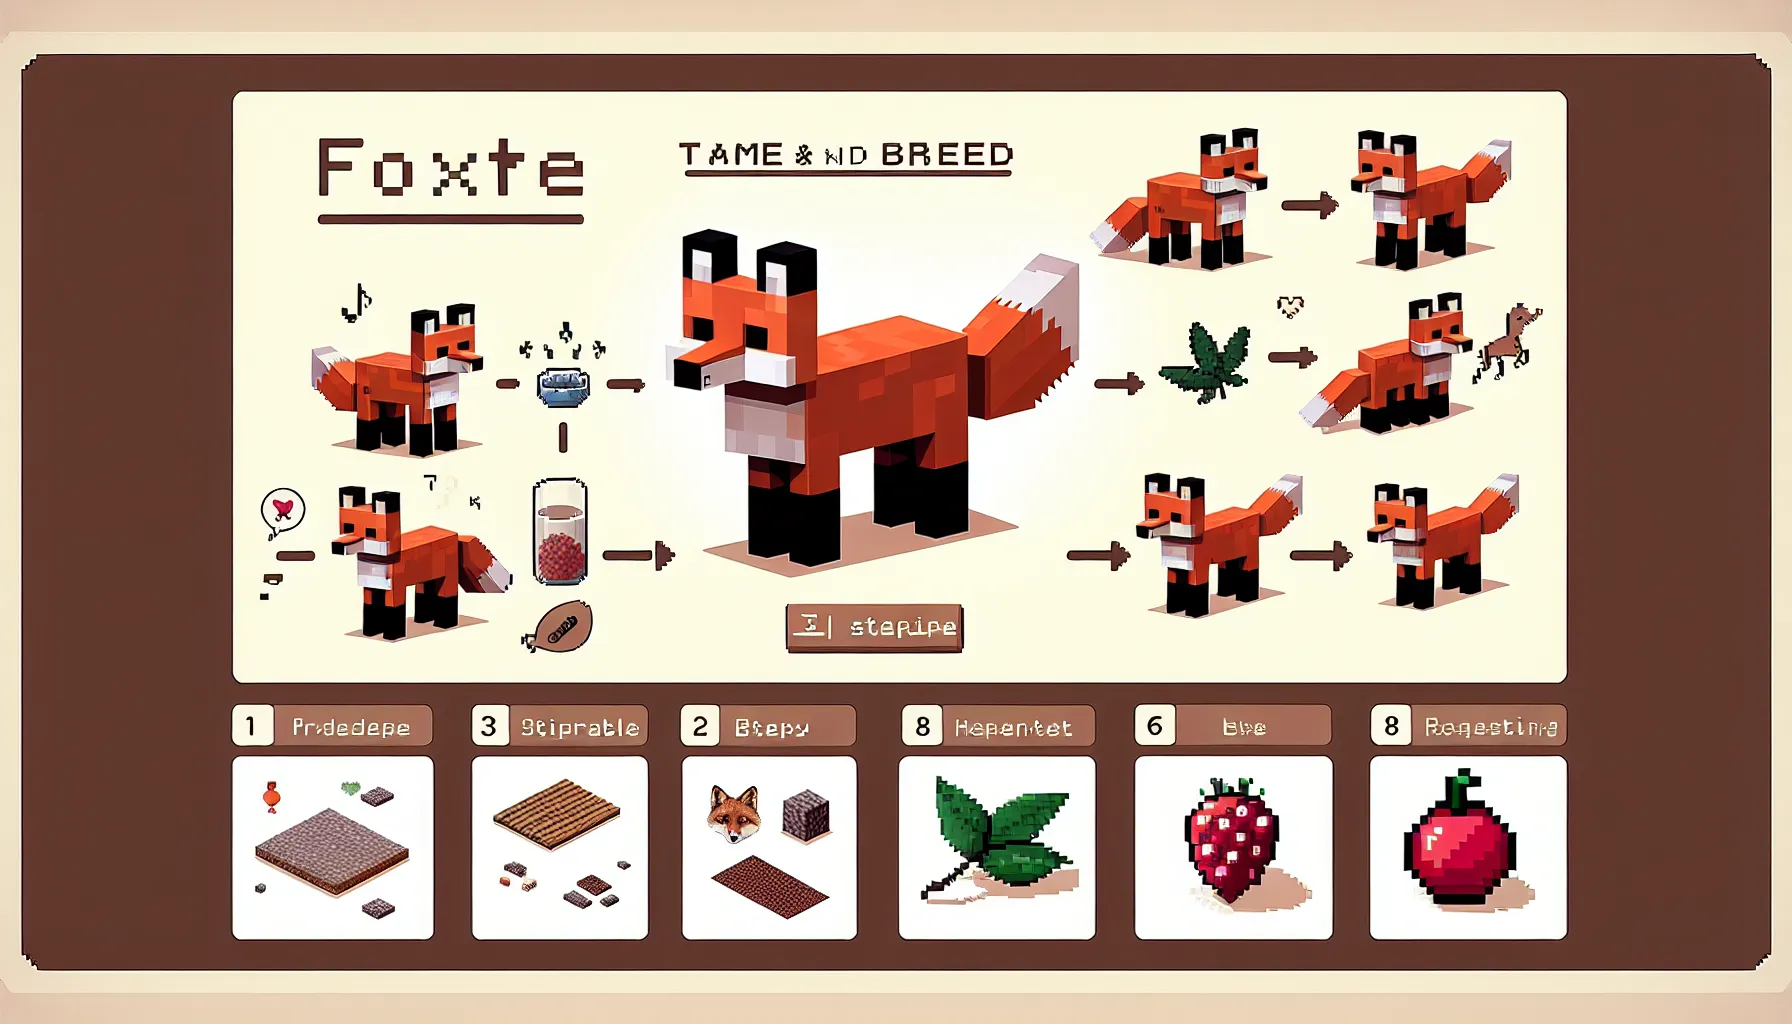 How to Breed and Tame a Fox in Minecraft - Easy Guide